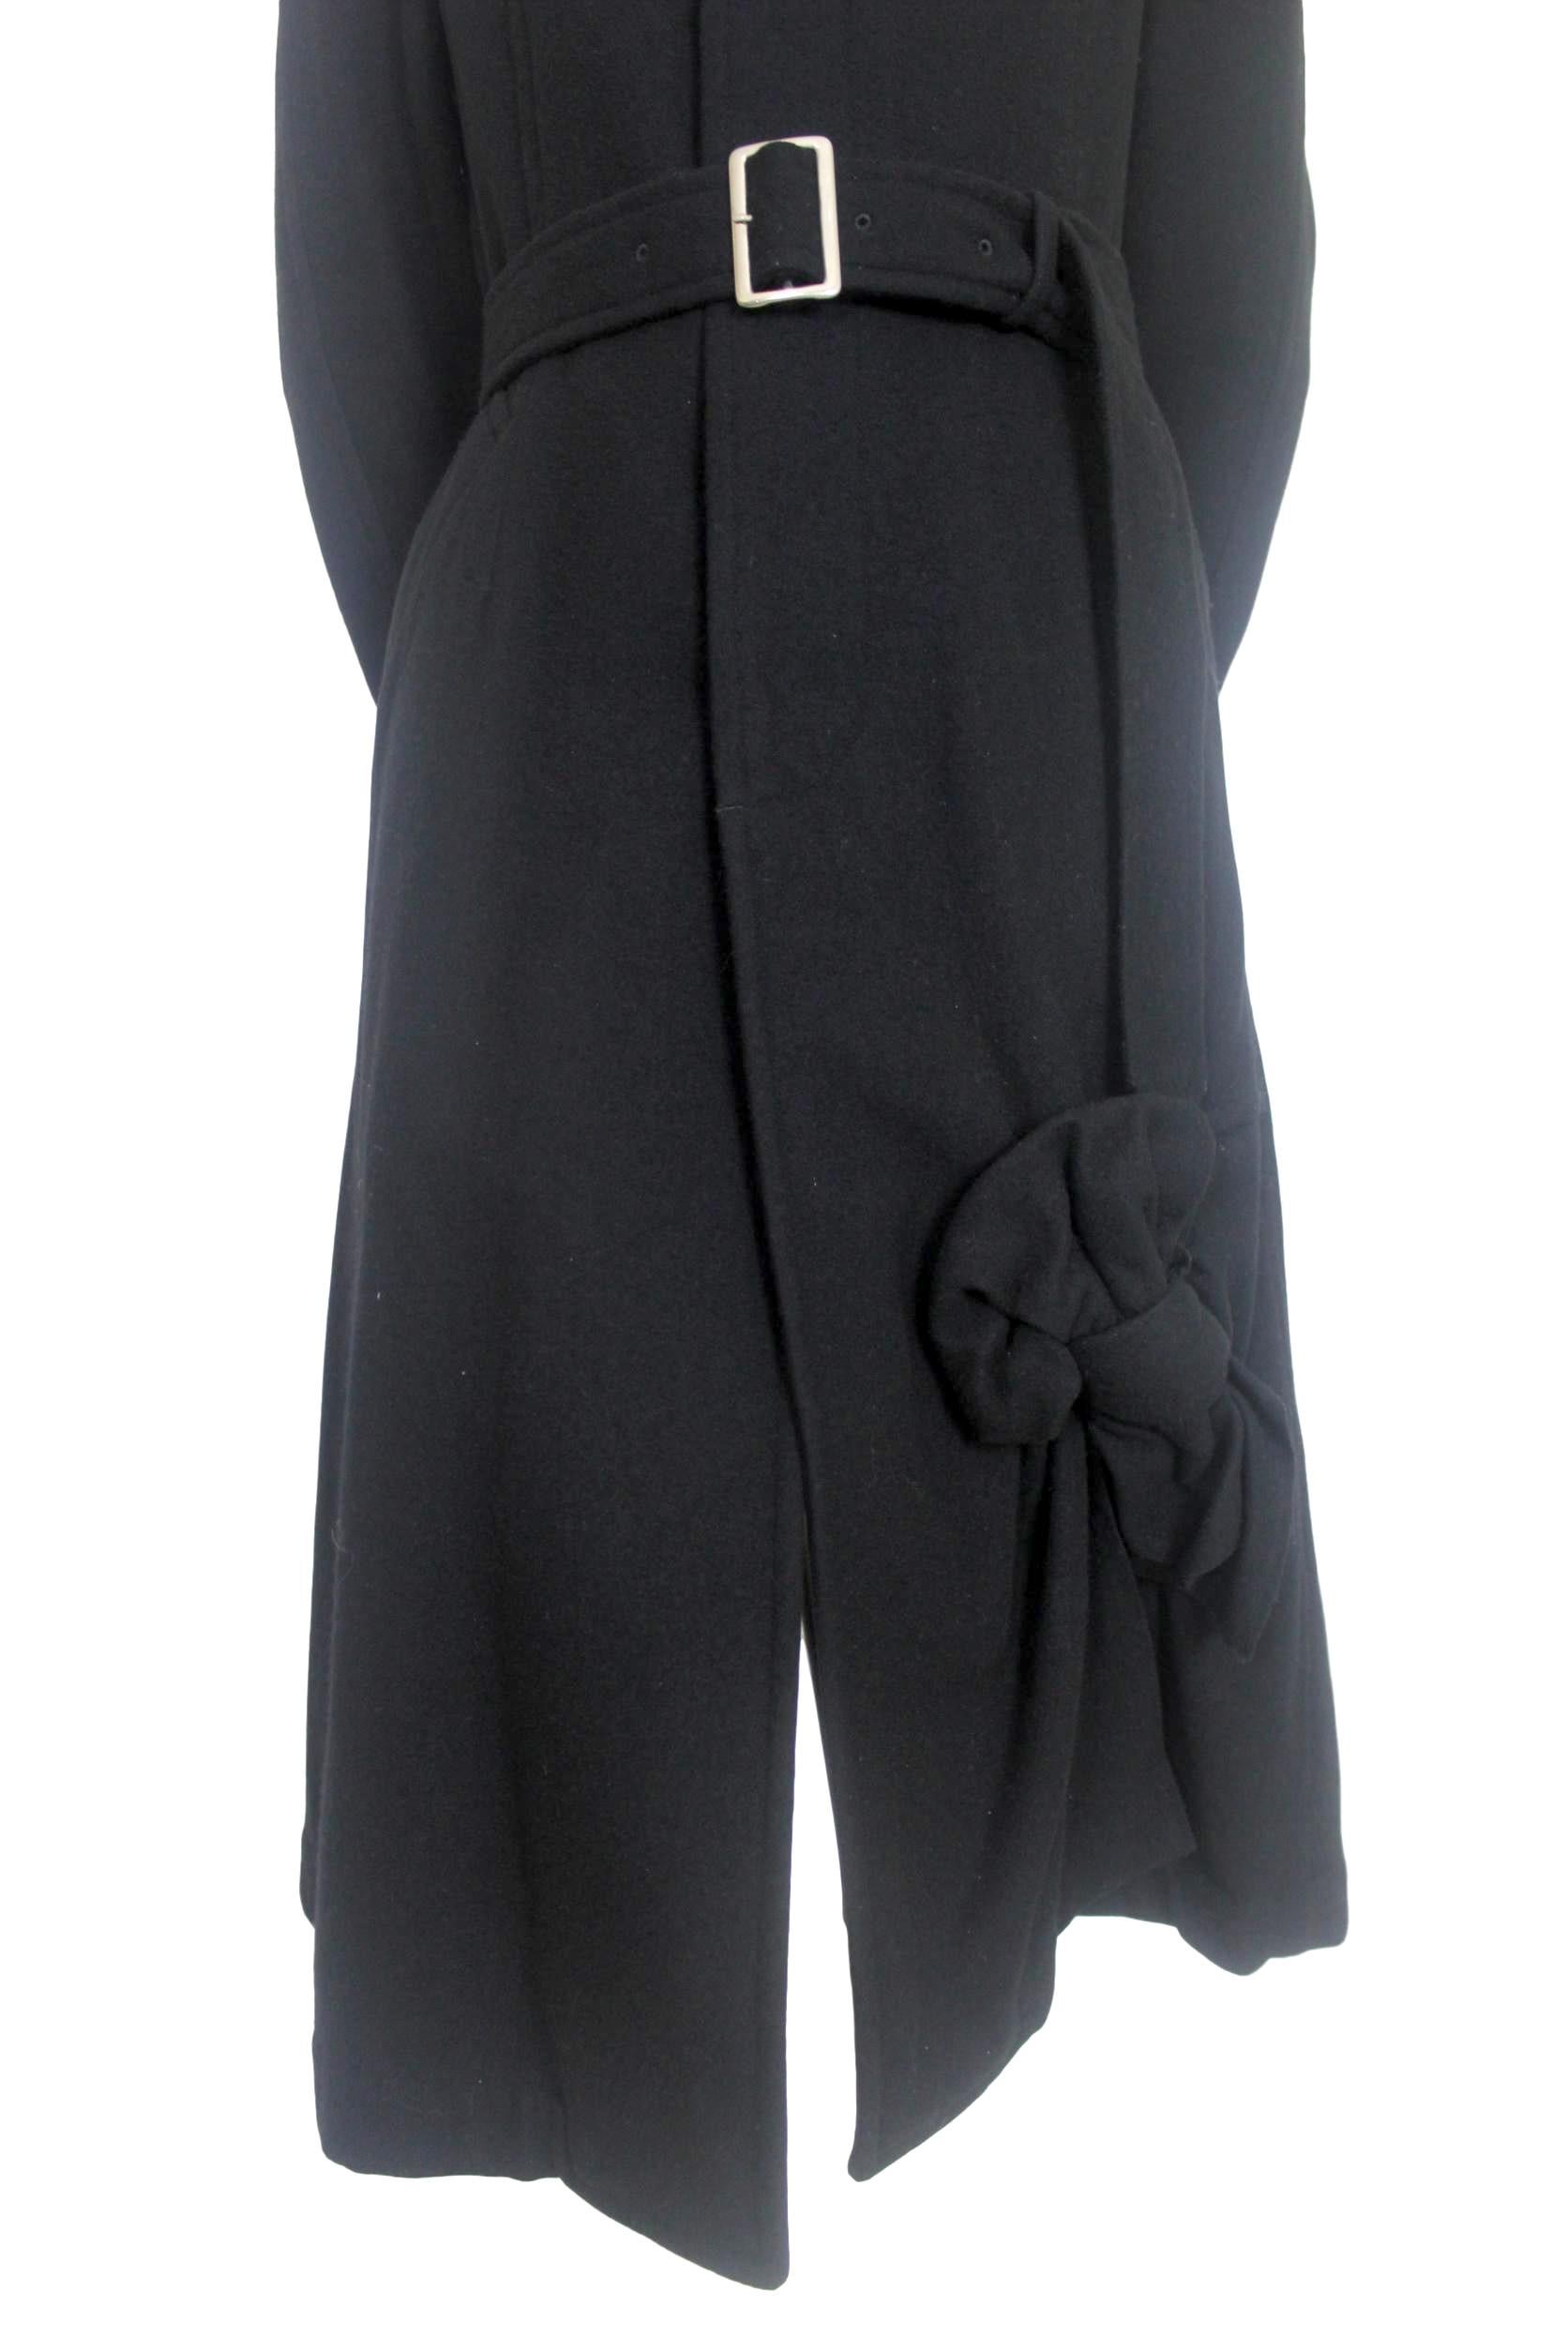 Black Comme des Garcons 2006 Collection Wool Coat with Bow Decoration For Sale